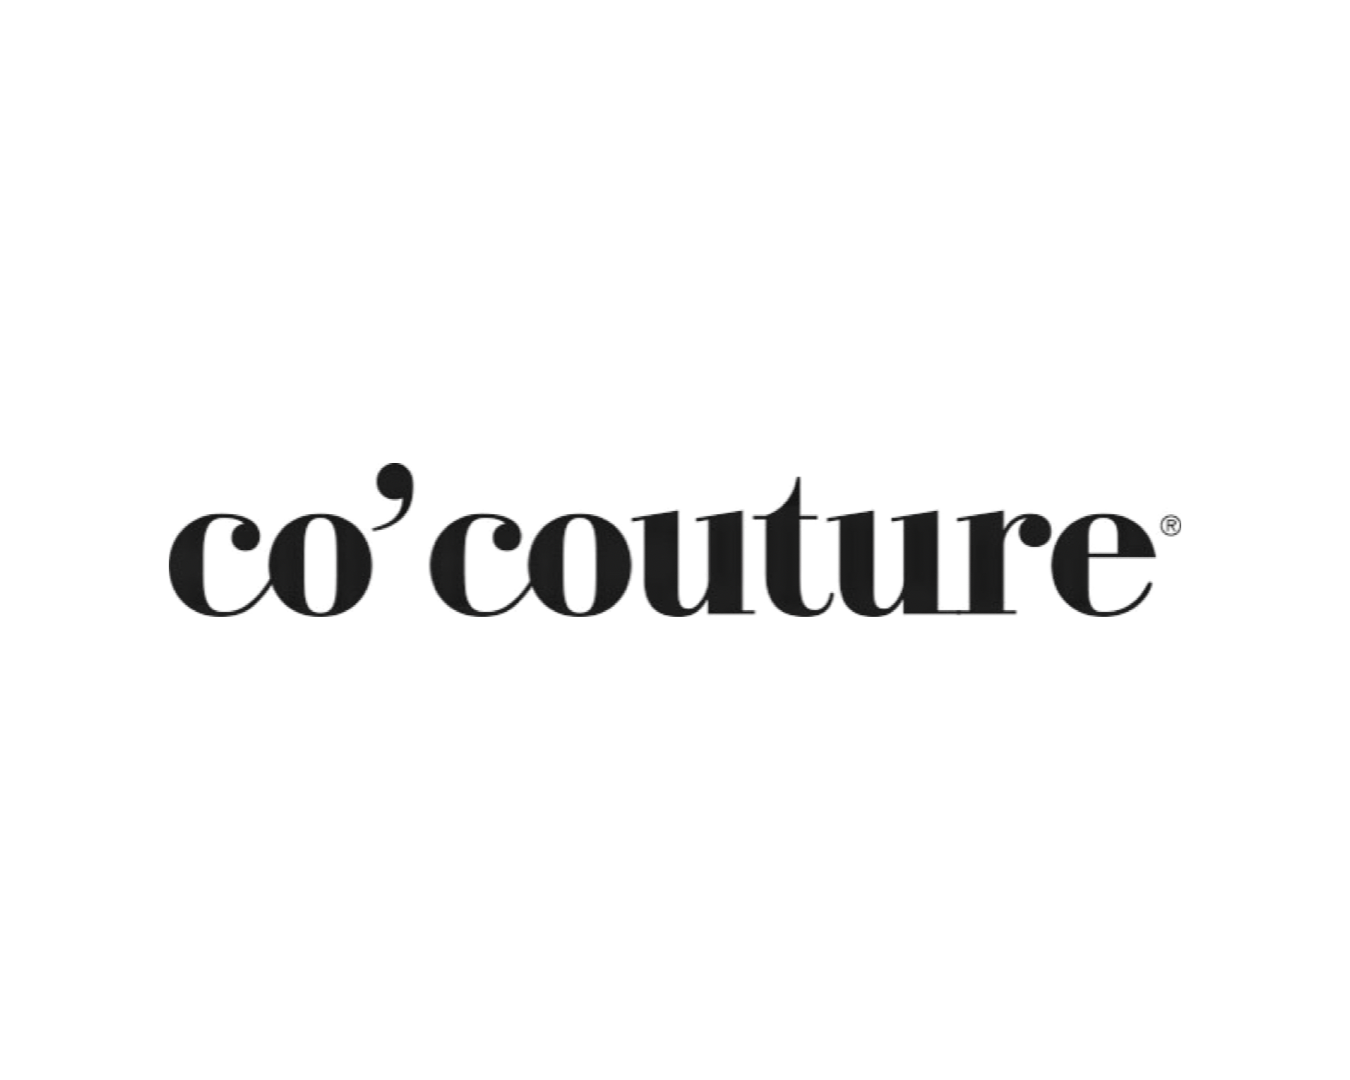 Co’Couture